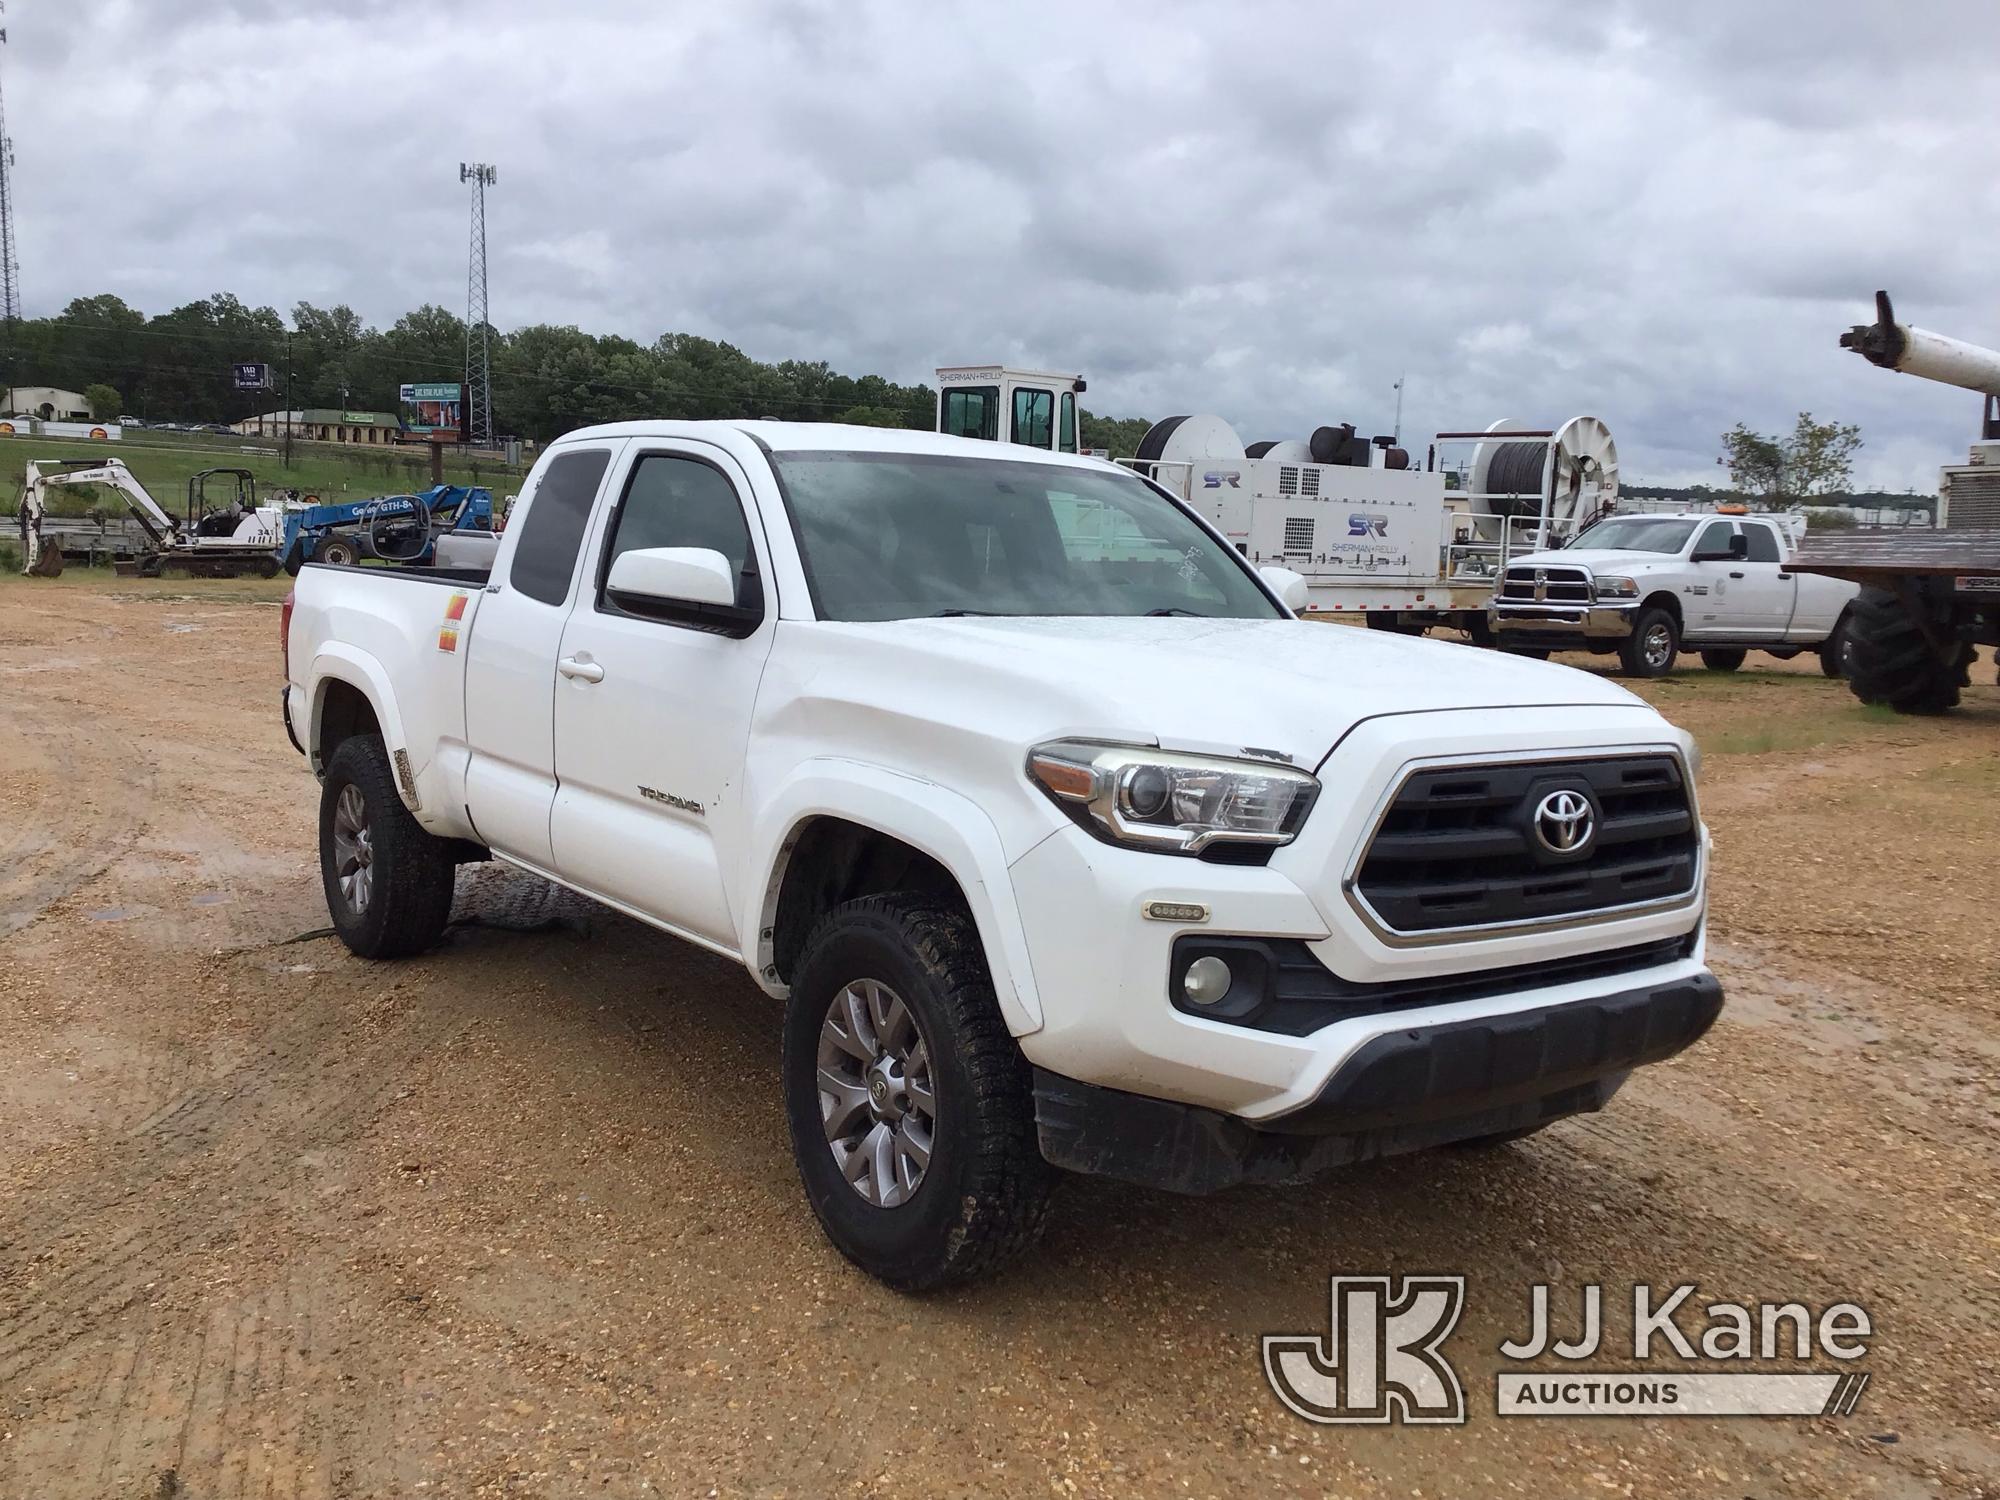 (Byram, MS) 2017 Toyota Tacoma 4x4 Extended-Cab Pickup Truck Runs, Moves, Windshield Cracked, Seat T